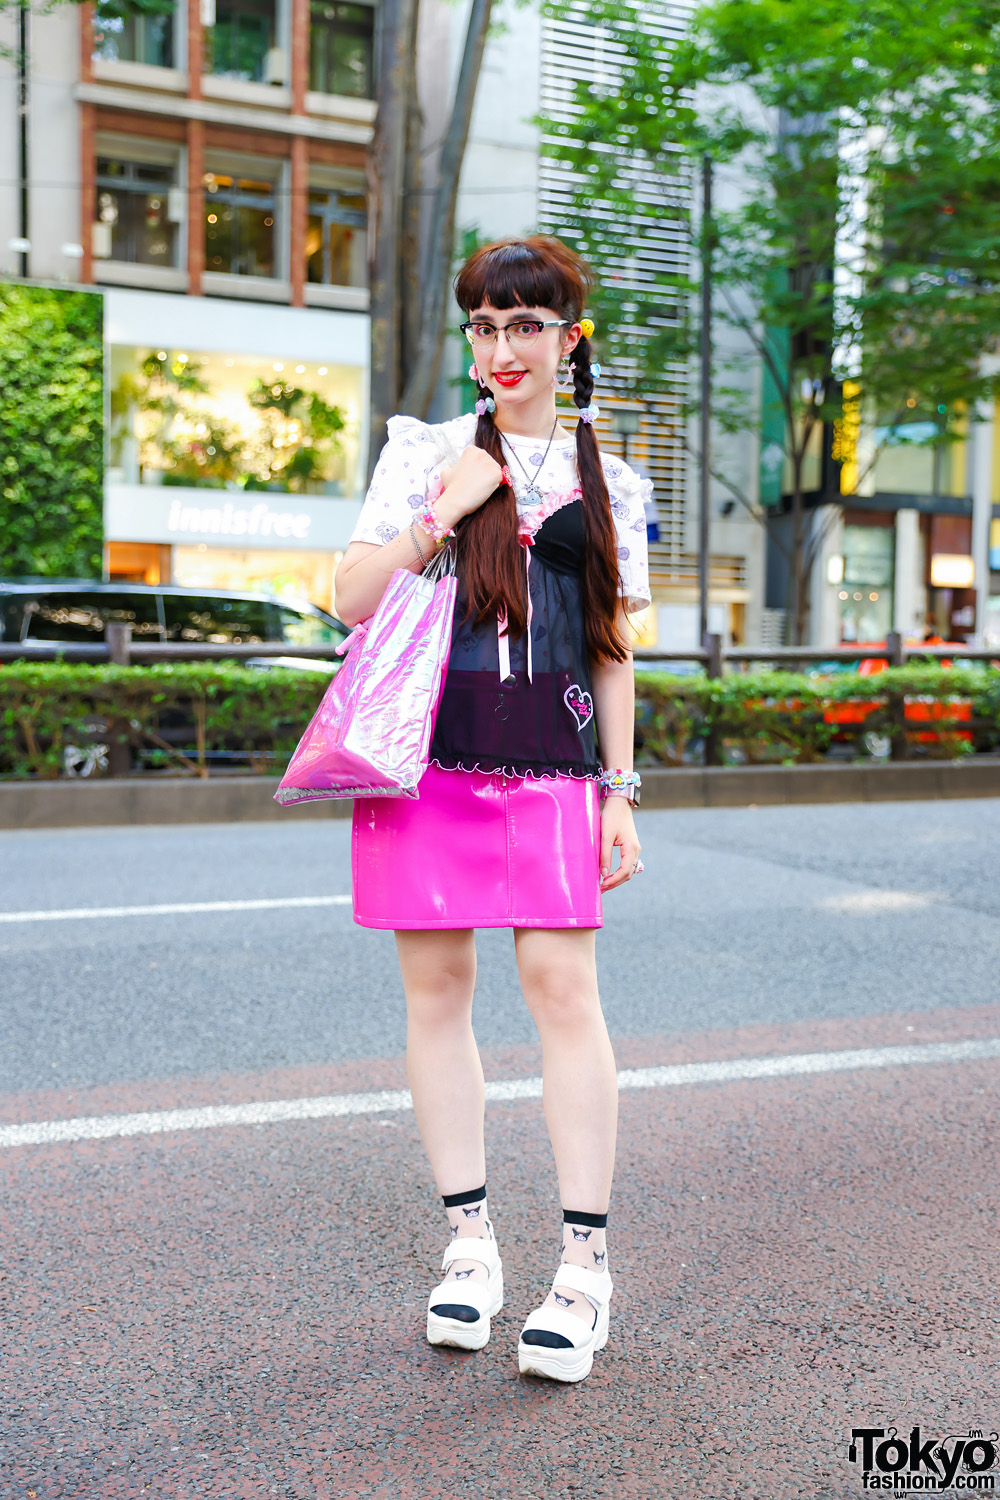 Harajuku Street Style w/ Twin Tails, Lingerie Top, 6%DokiDoki, Candy Stripper, Forever21 Patent Skirt, Vivienne Westwood, WC and White Sandals